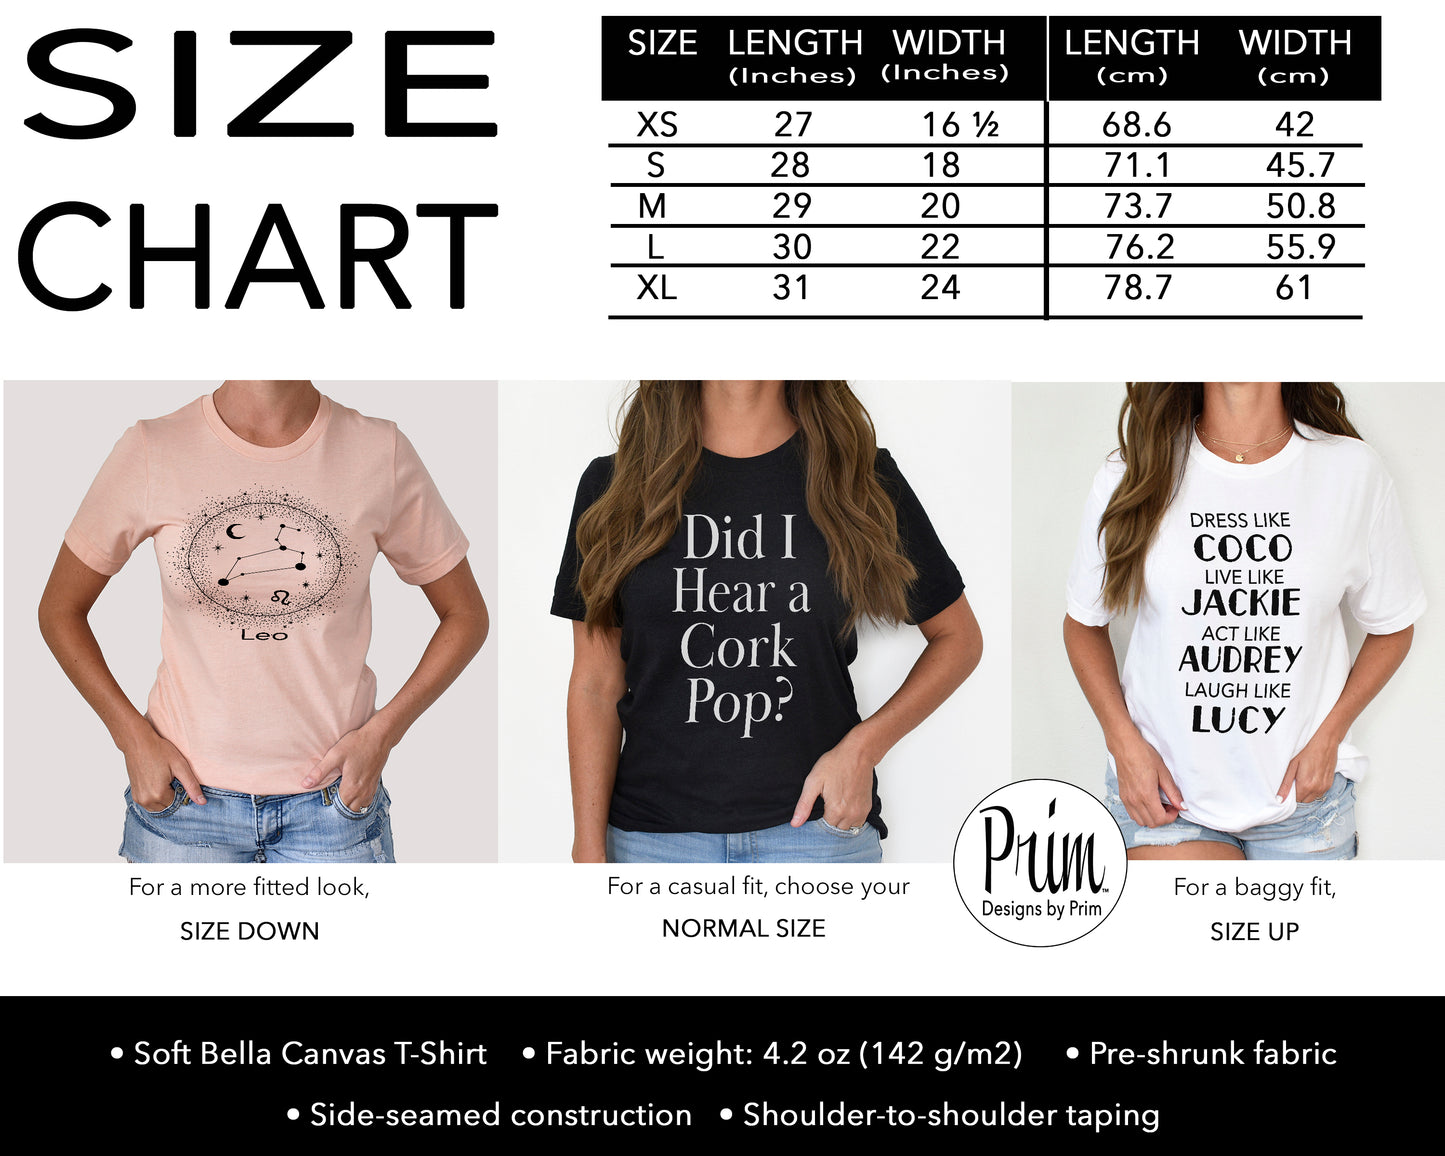 Designs by Prim custom graphic tee top shirts size chart